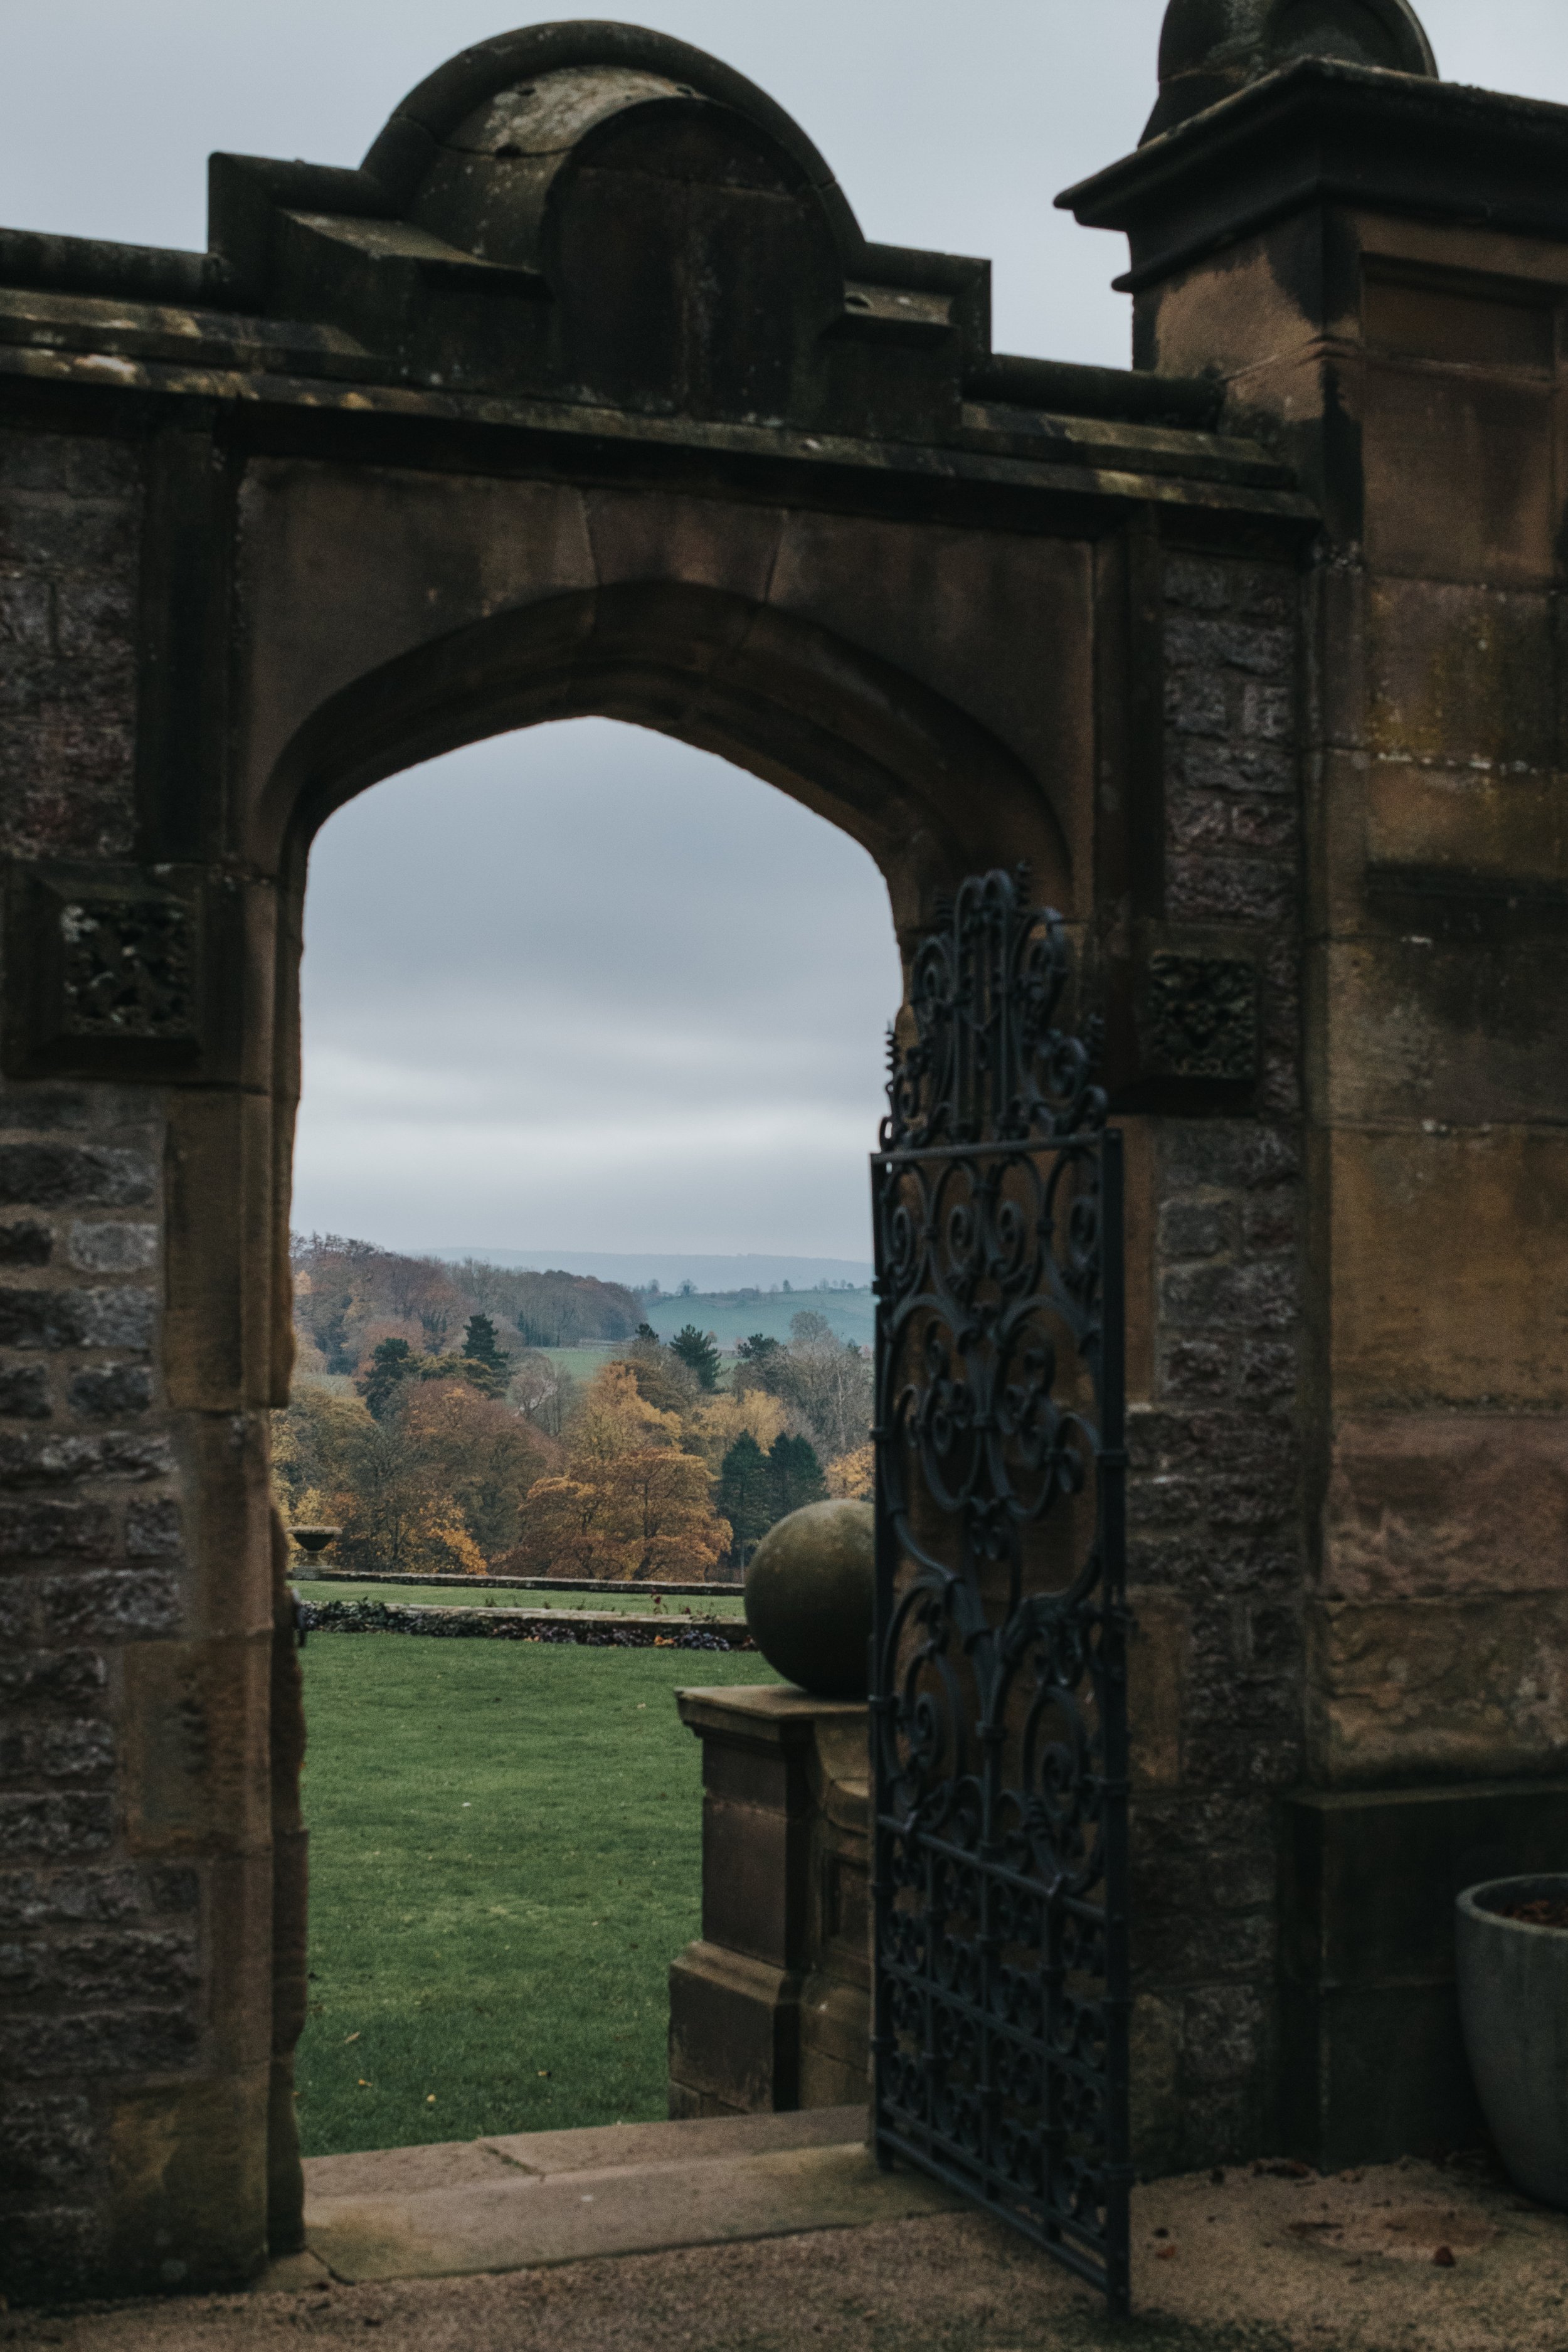 Archway leading onto the back garden of Thornbridge Hall, autumnal trees in the distance.